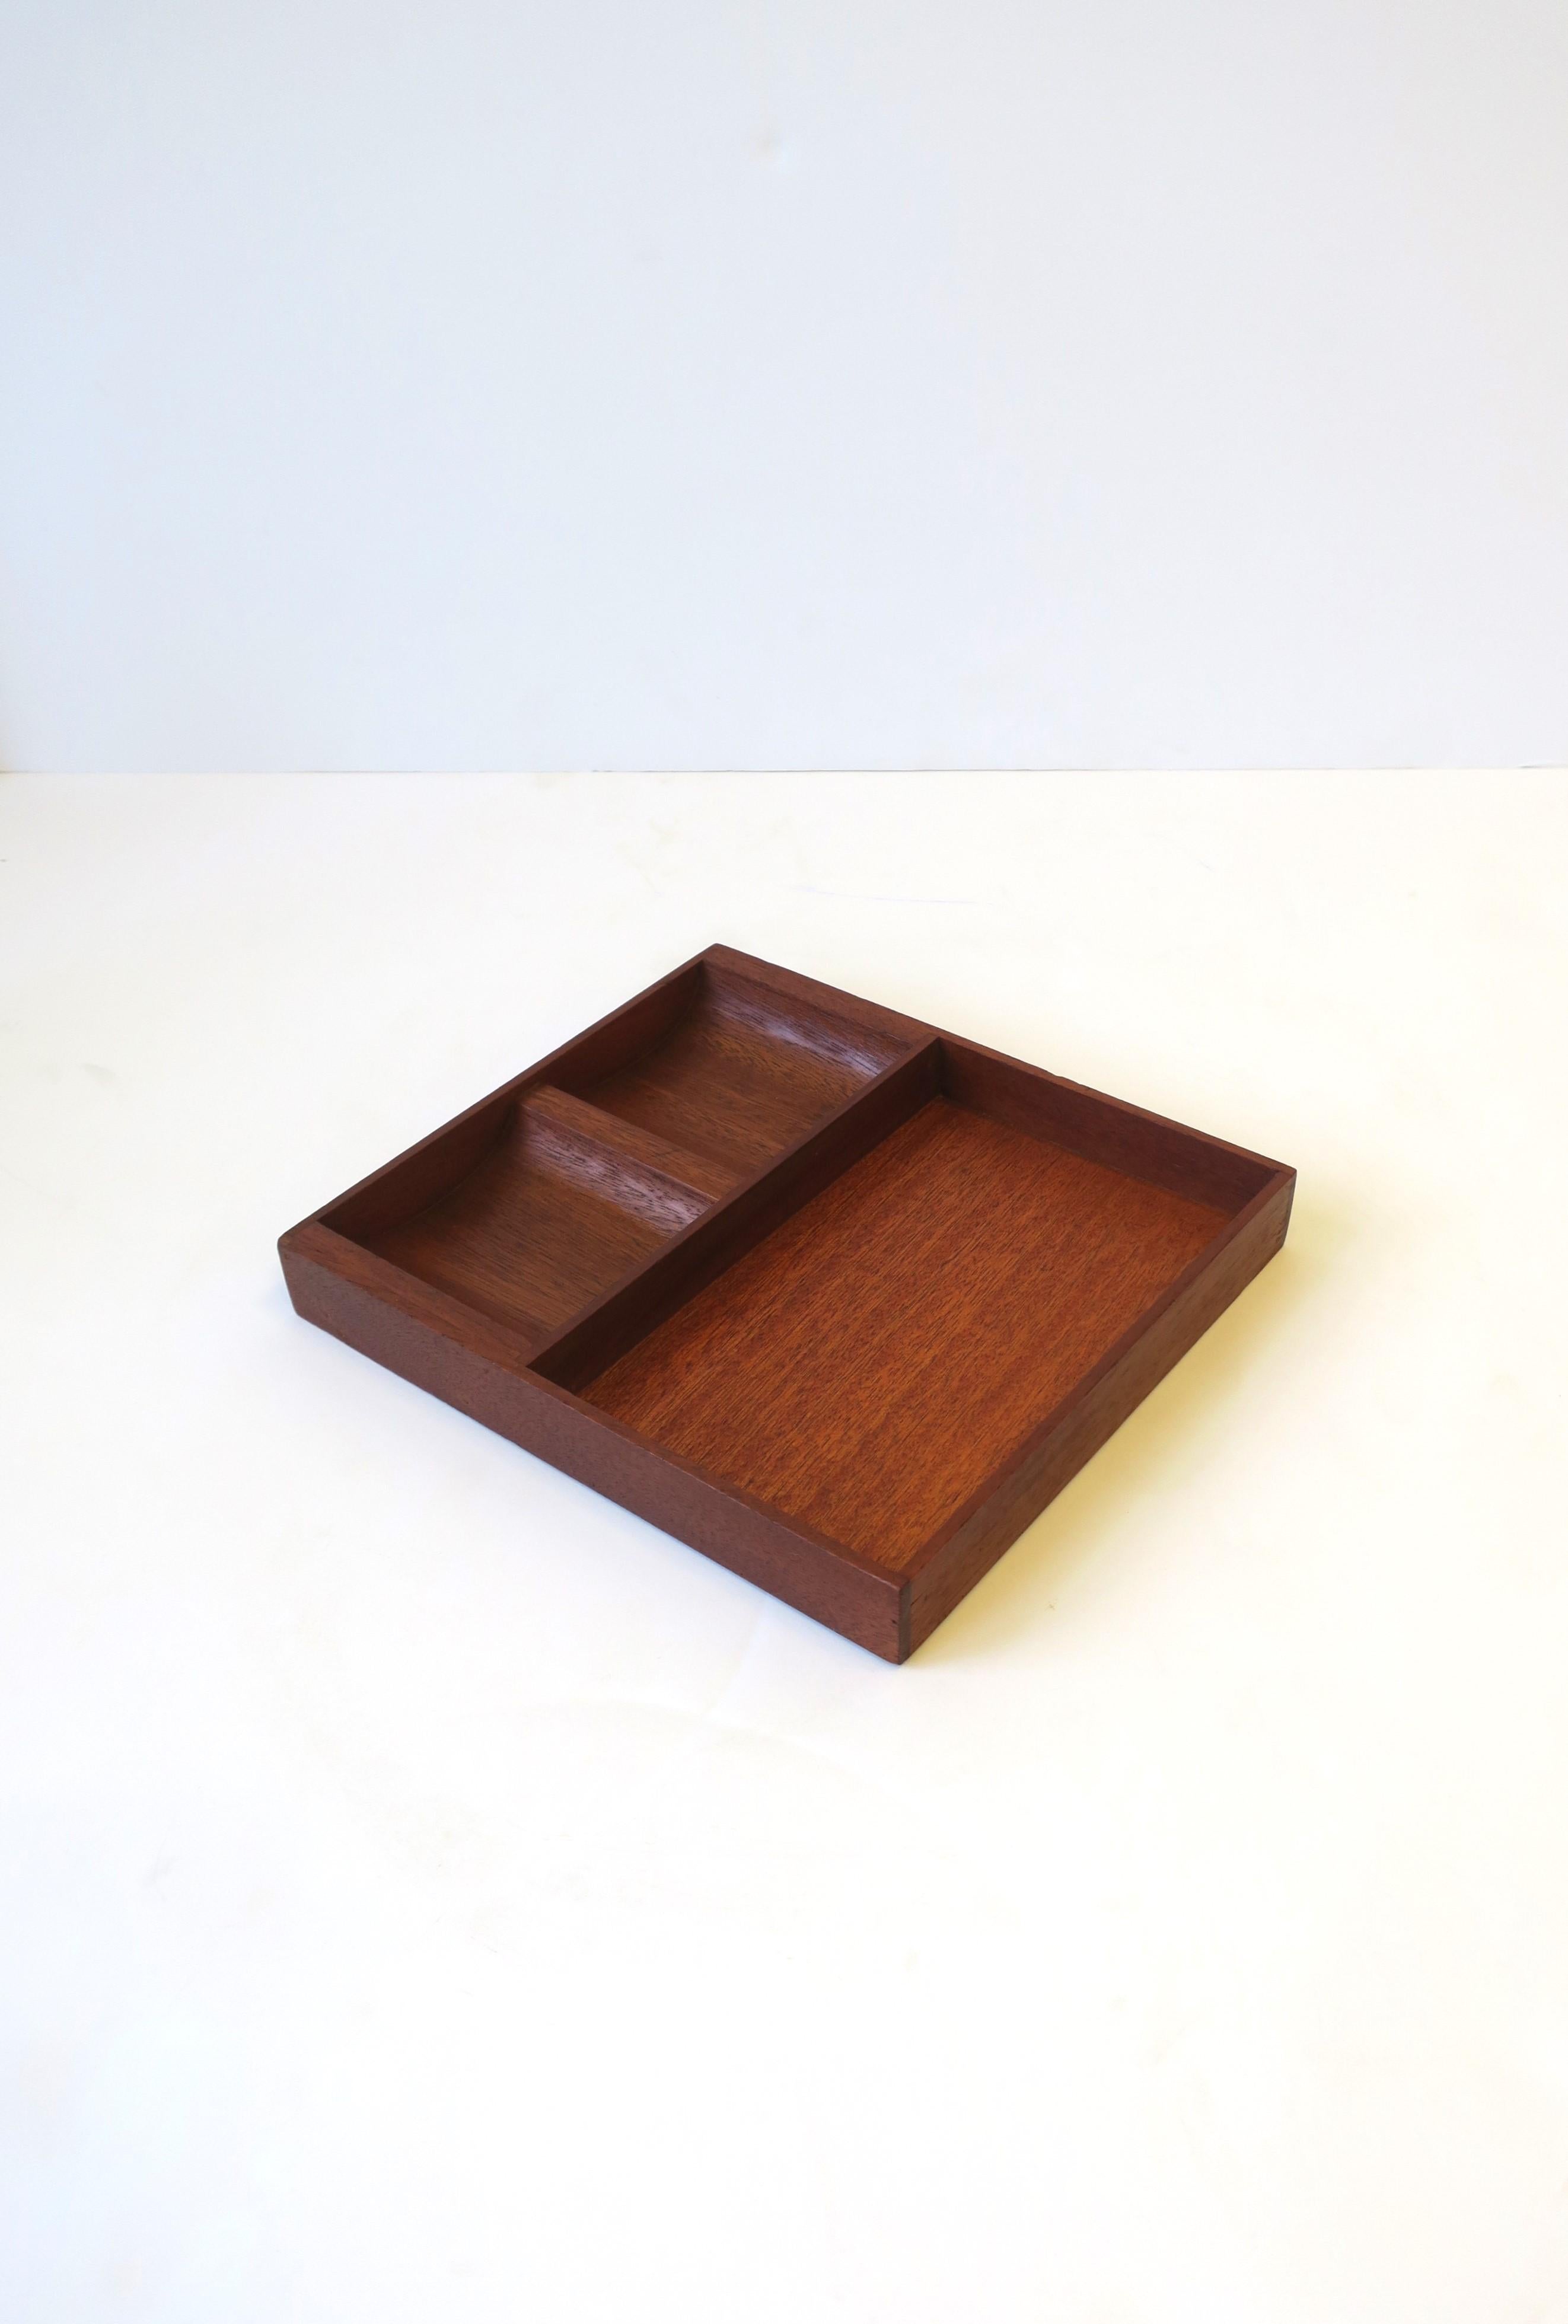 A Mid-Century Modern period or Minimalist style desk or vanity teak wood tray organizer. Piece has three compartment and can work well on a desk or on a vanity, nightstand table, walk-in-closet, etc., for jewelry and more, as demonstrated in images.